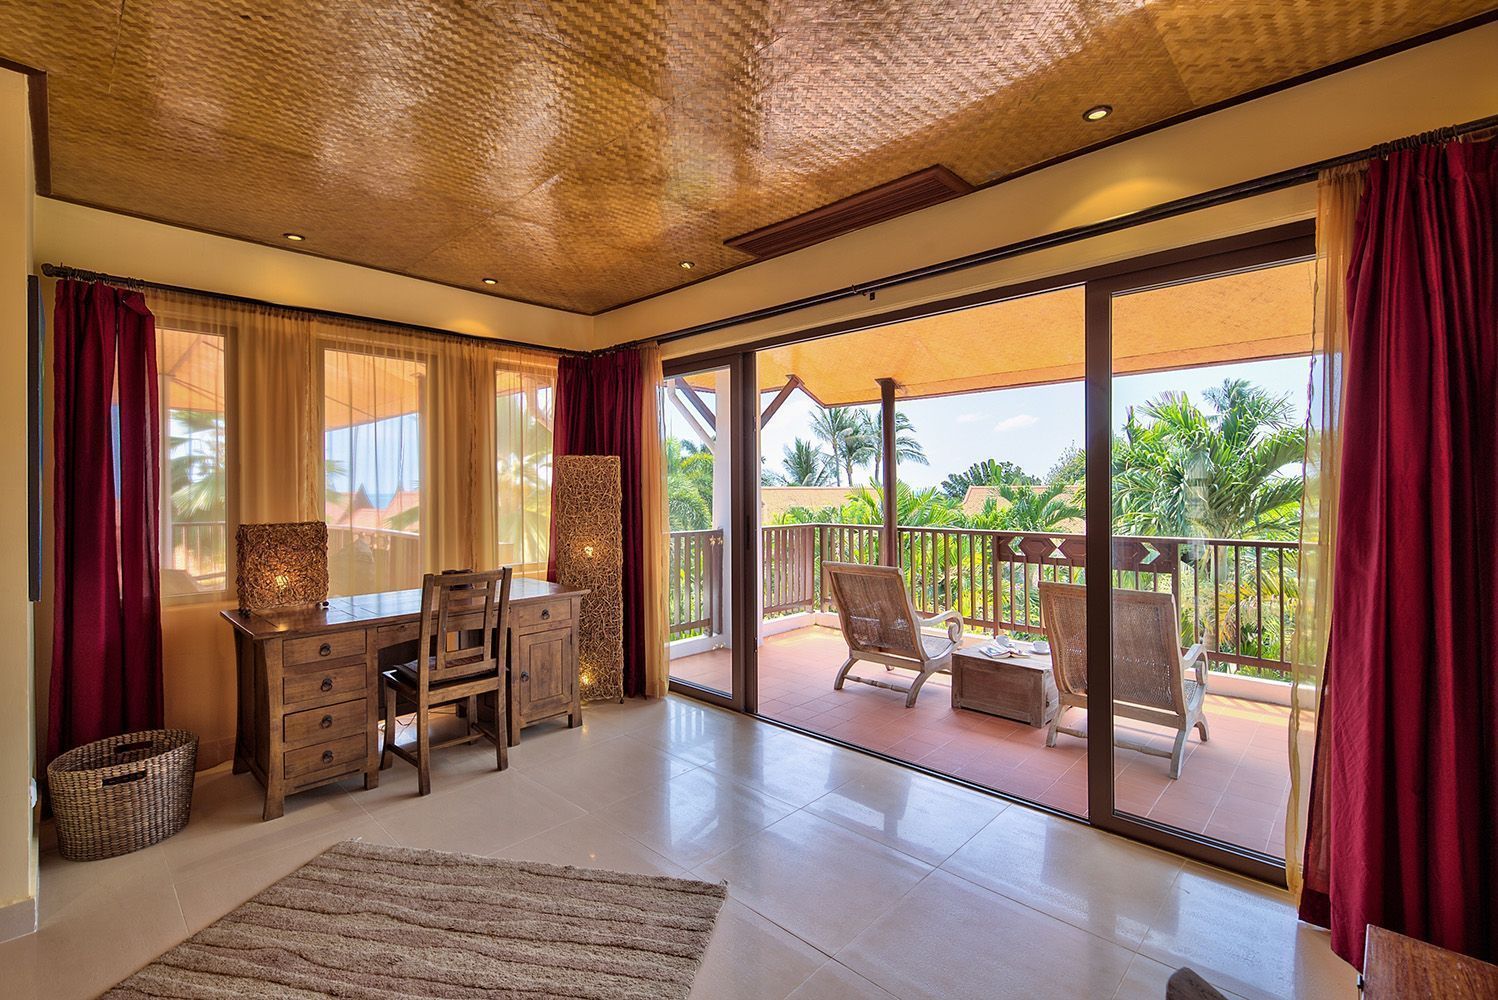 3 bedrooms luxurious beach side villa in a residence in Hua Thanon: 3 bedrooms luxurious beach side villa in a residence in Hua Thanon